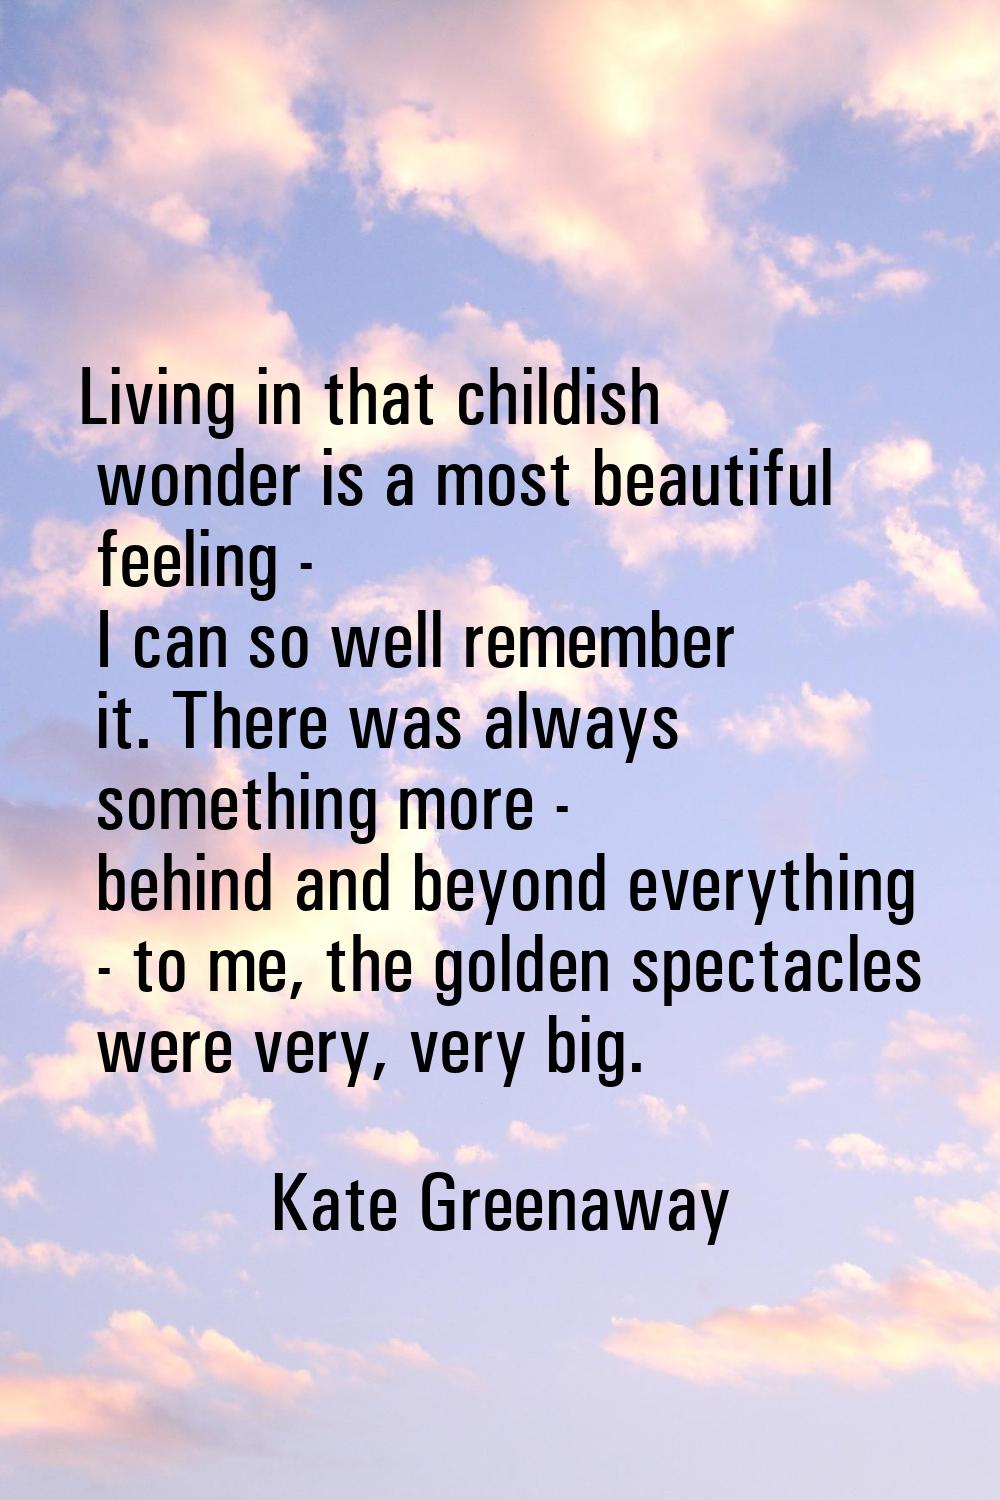 Living in that childish wonder is a most beautiful feeling - I can so well remember it. There was a